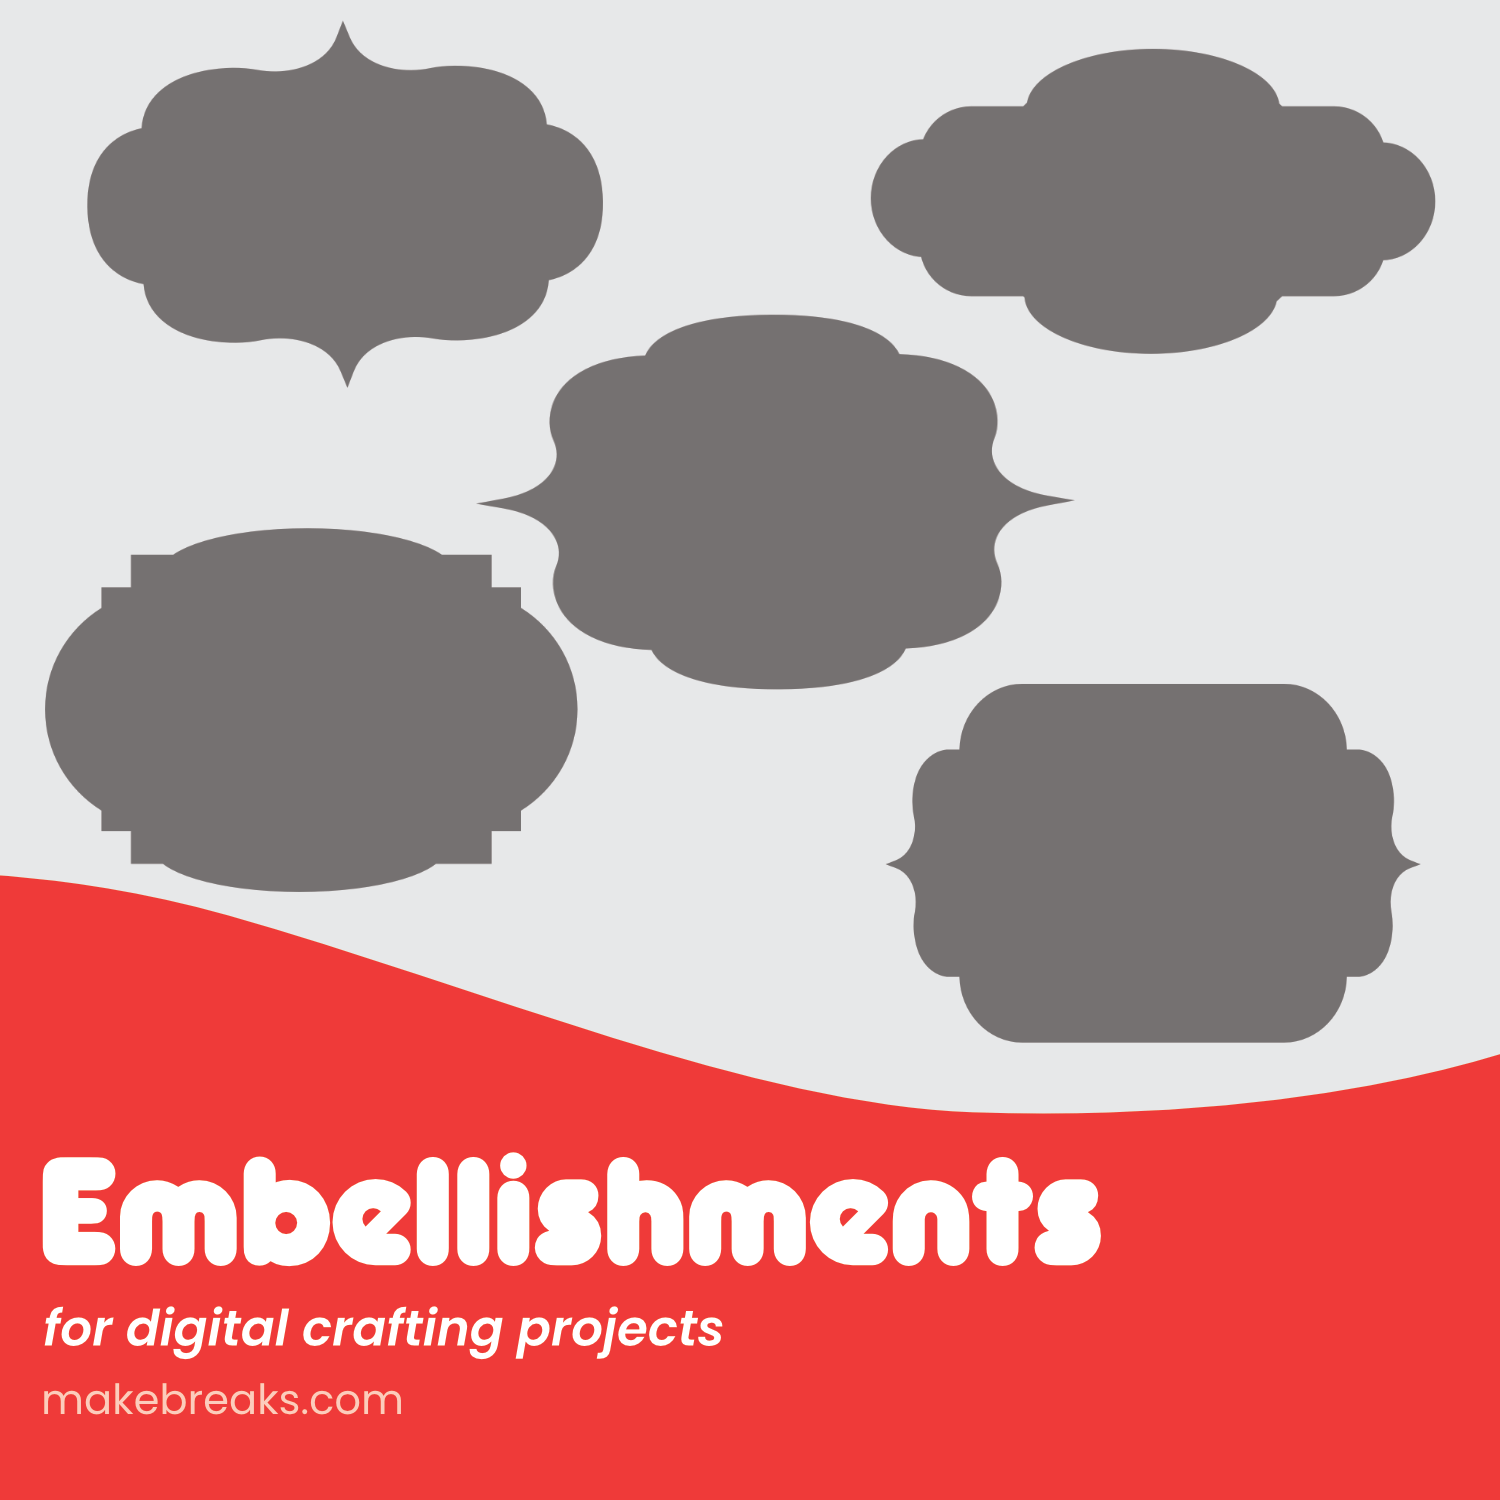 FREE Embellishment Templates for Digital Planners, Cards & Digital Crafts